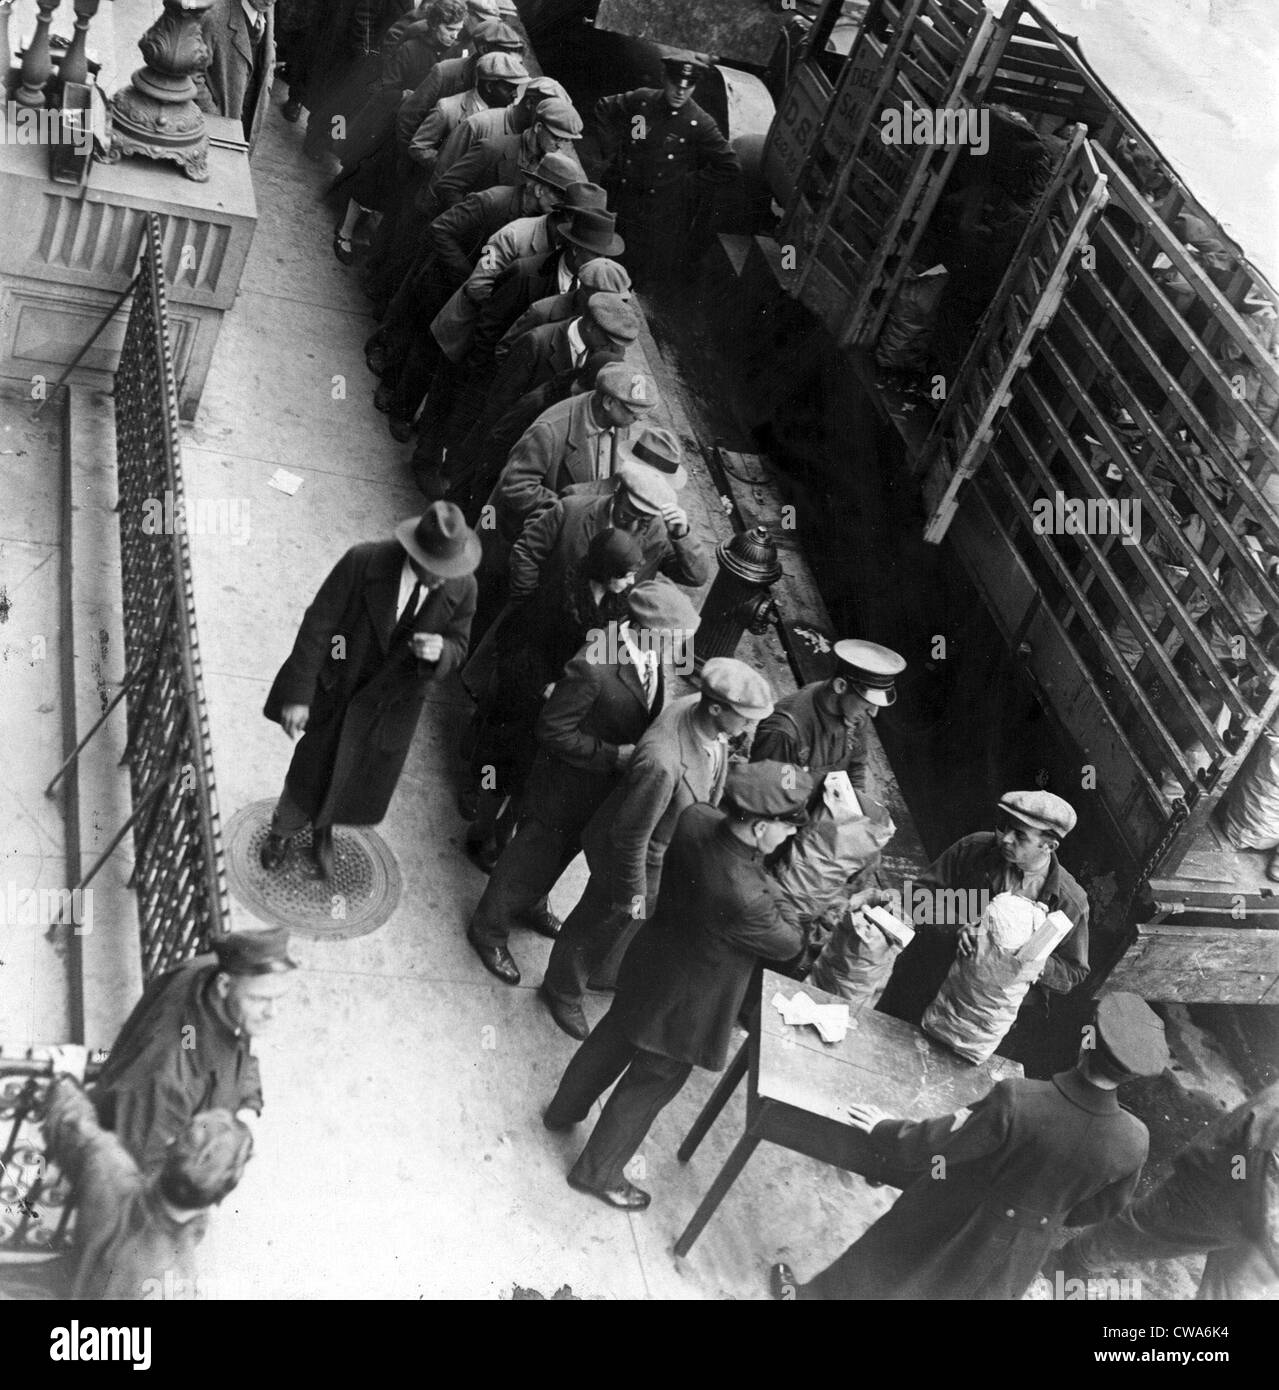 Food handouts in New York in 1930. Police stations were used as distribution centers. Photo shows food being distributed in Stock Photo